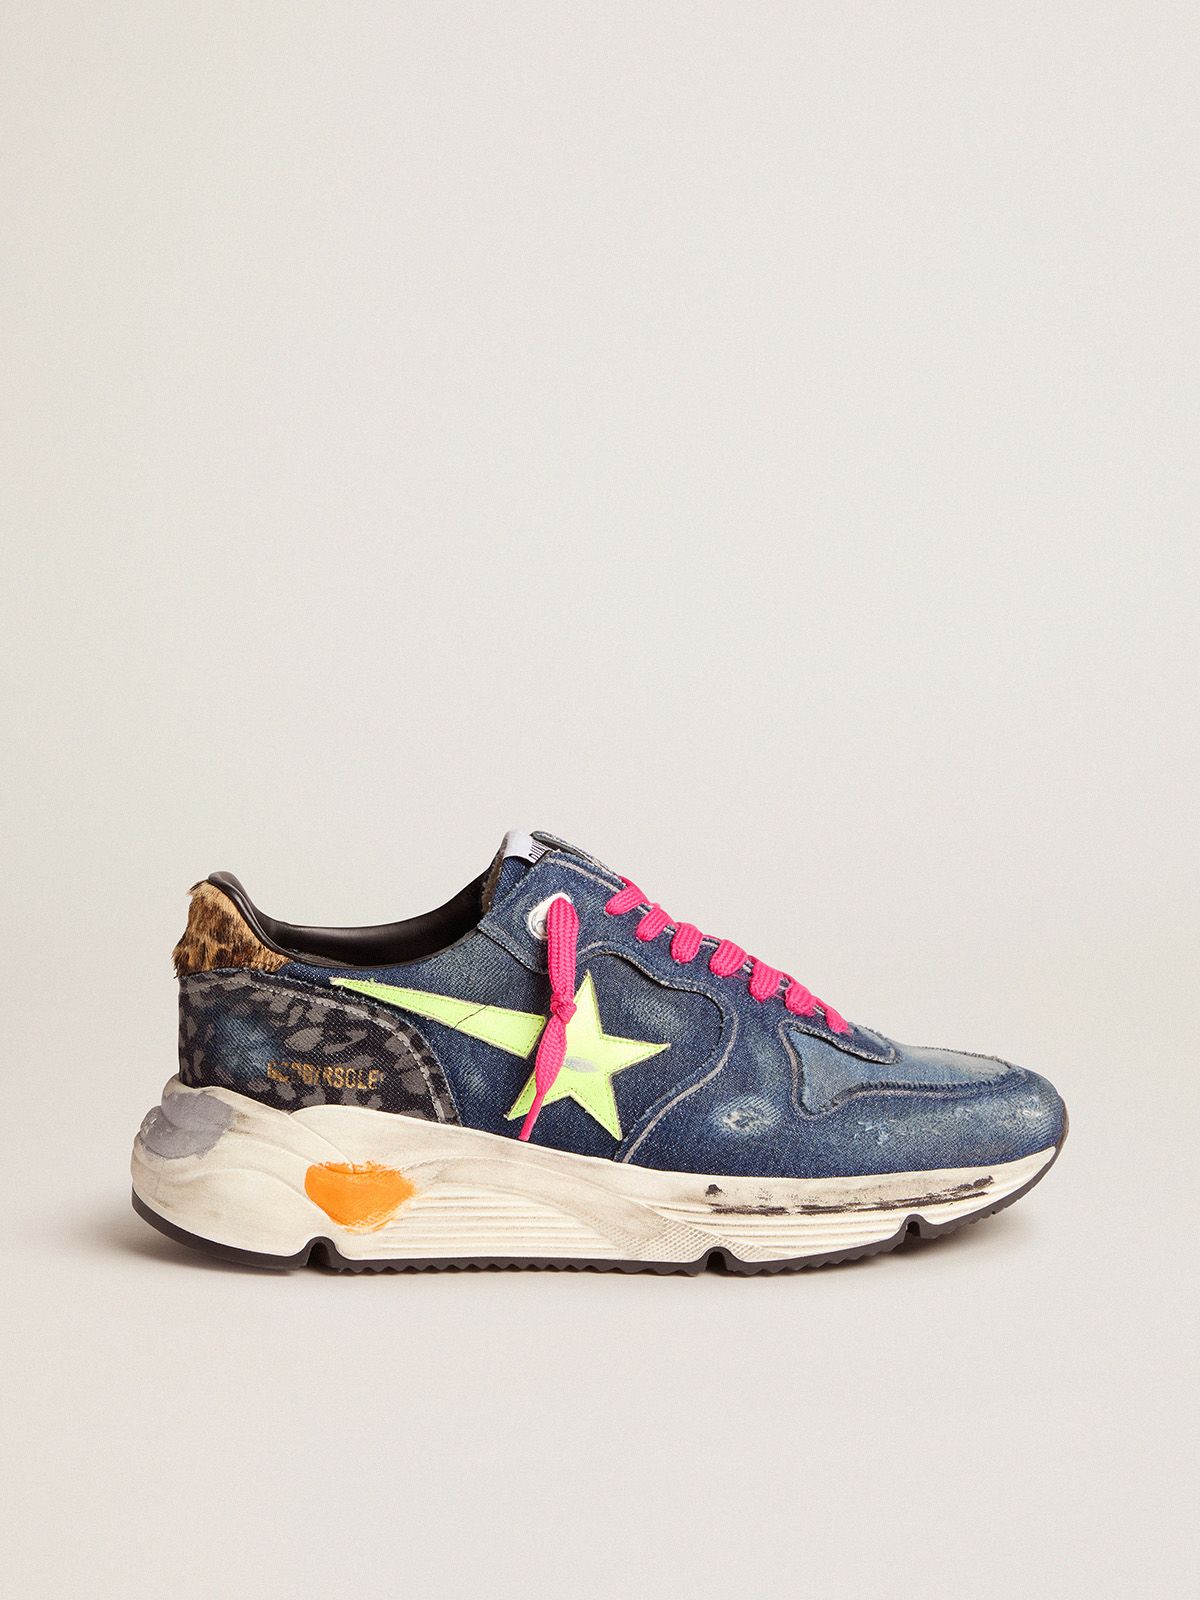 Superstar Ggdb Denim Running Sole sneakers with a fluorescent yellow star and leopard-print pony skin heel tab